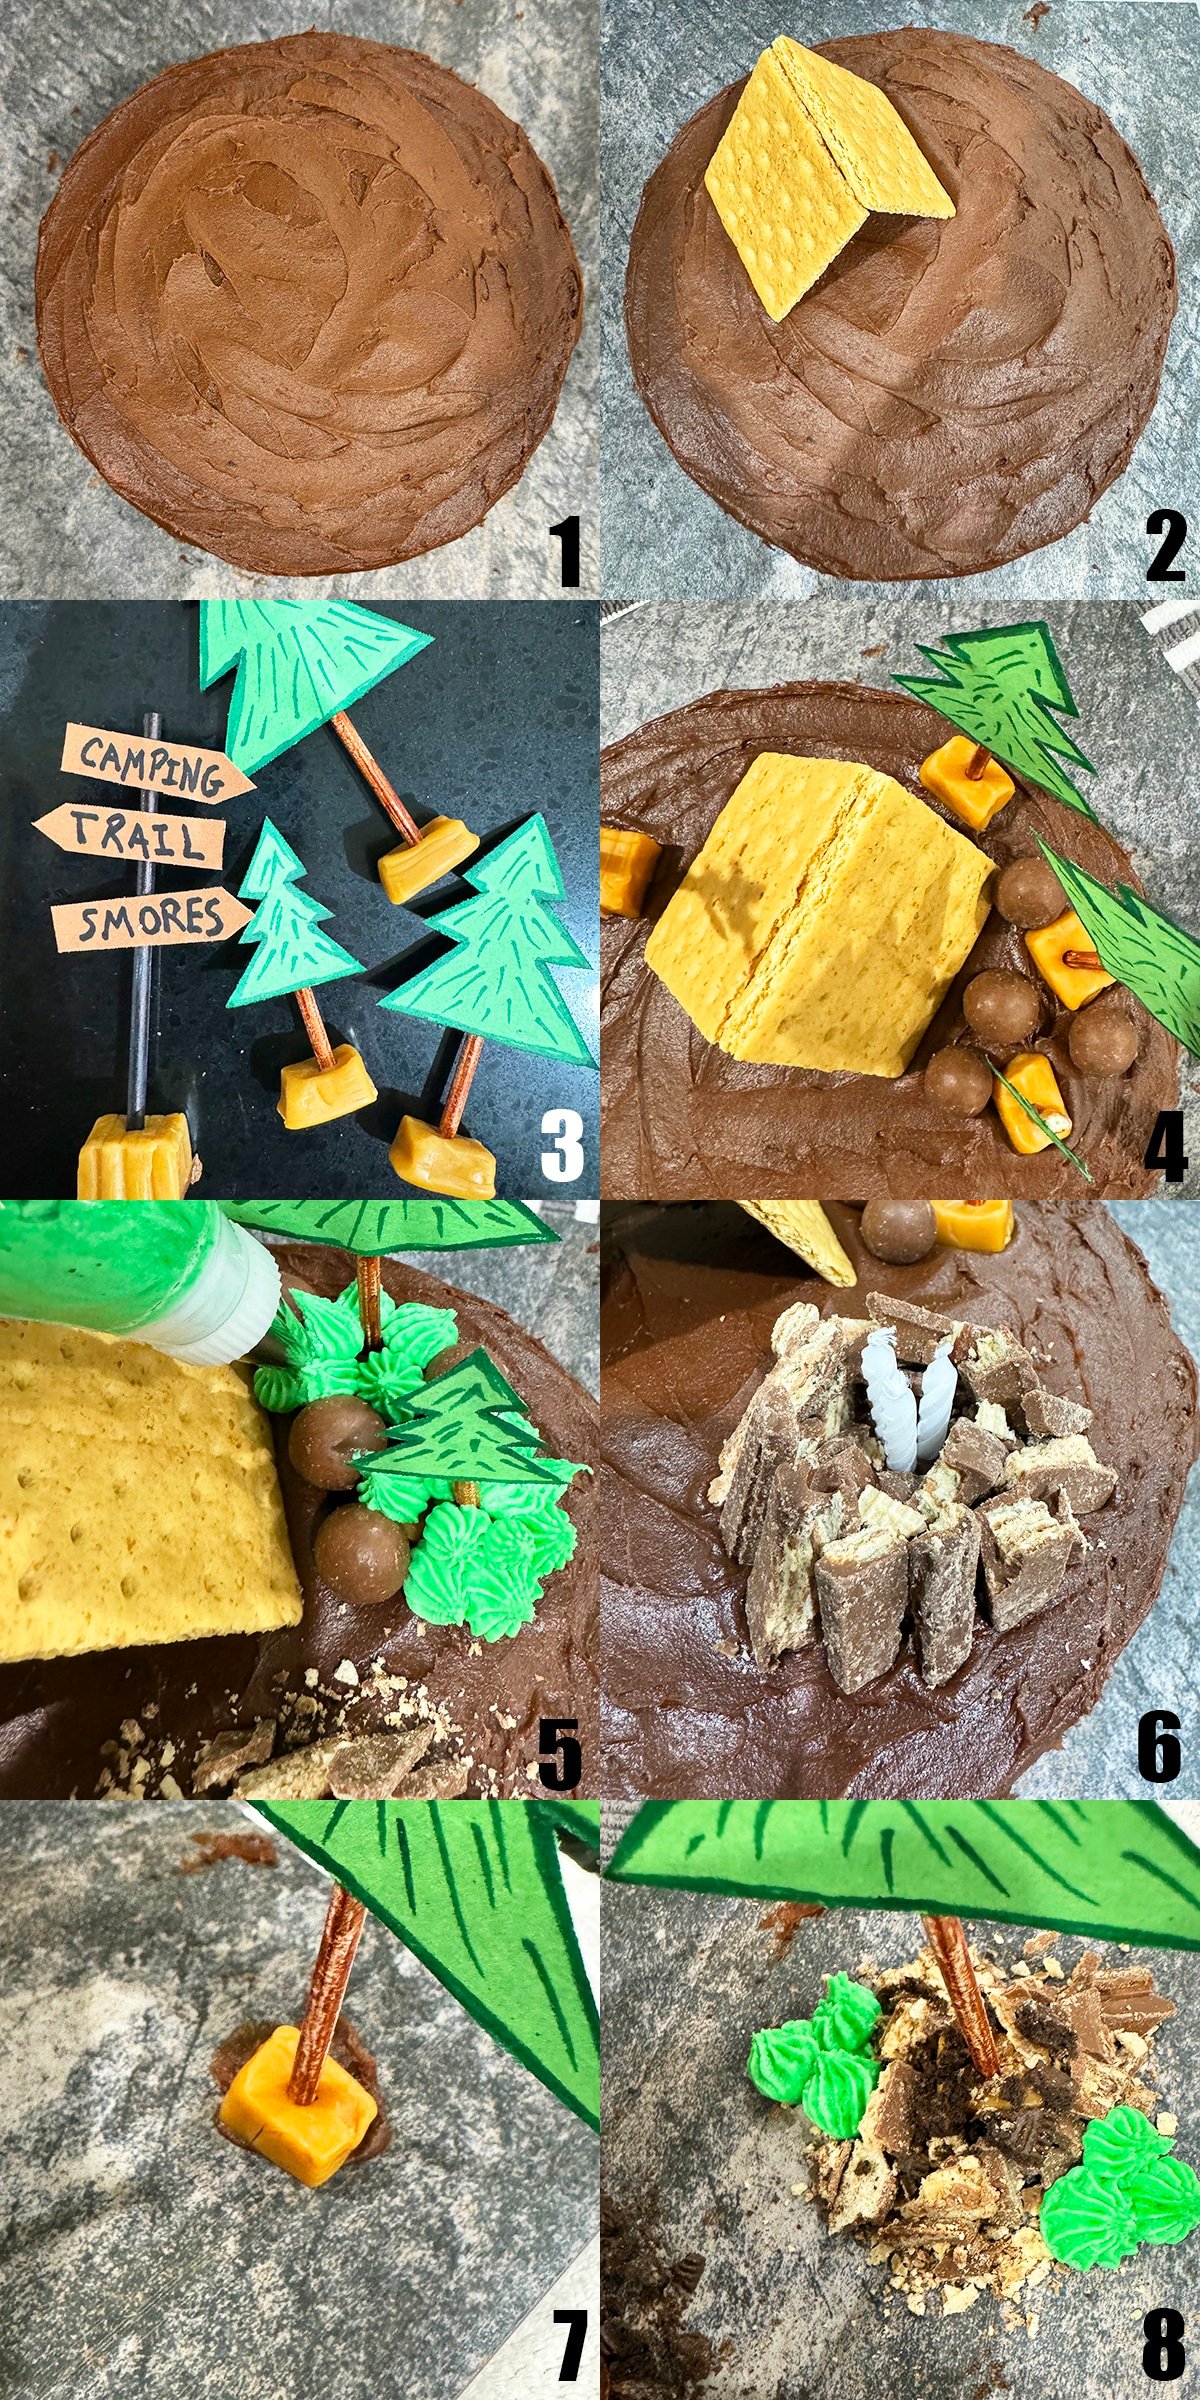 Collage Image With Step by Step Process Shots on How to Make Camping Cake- Part 1.